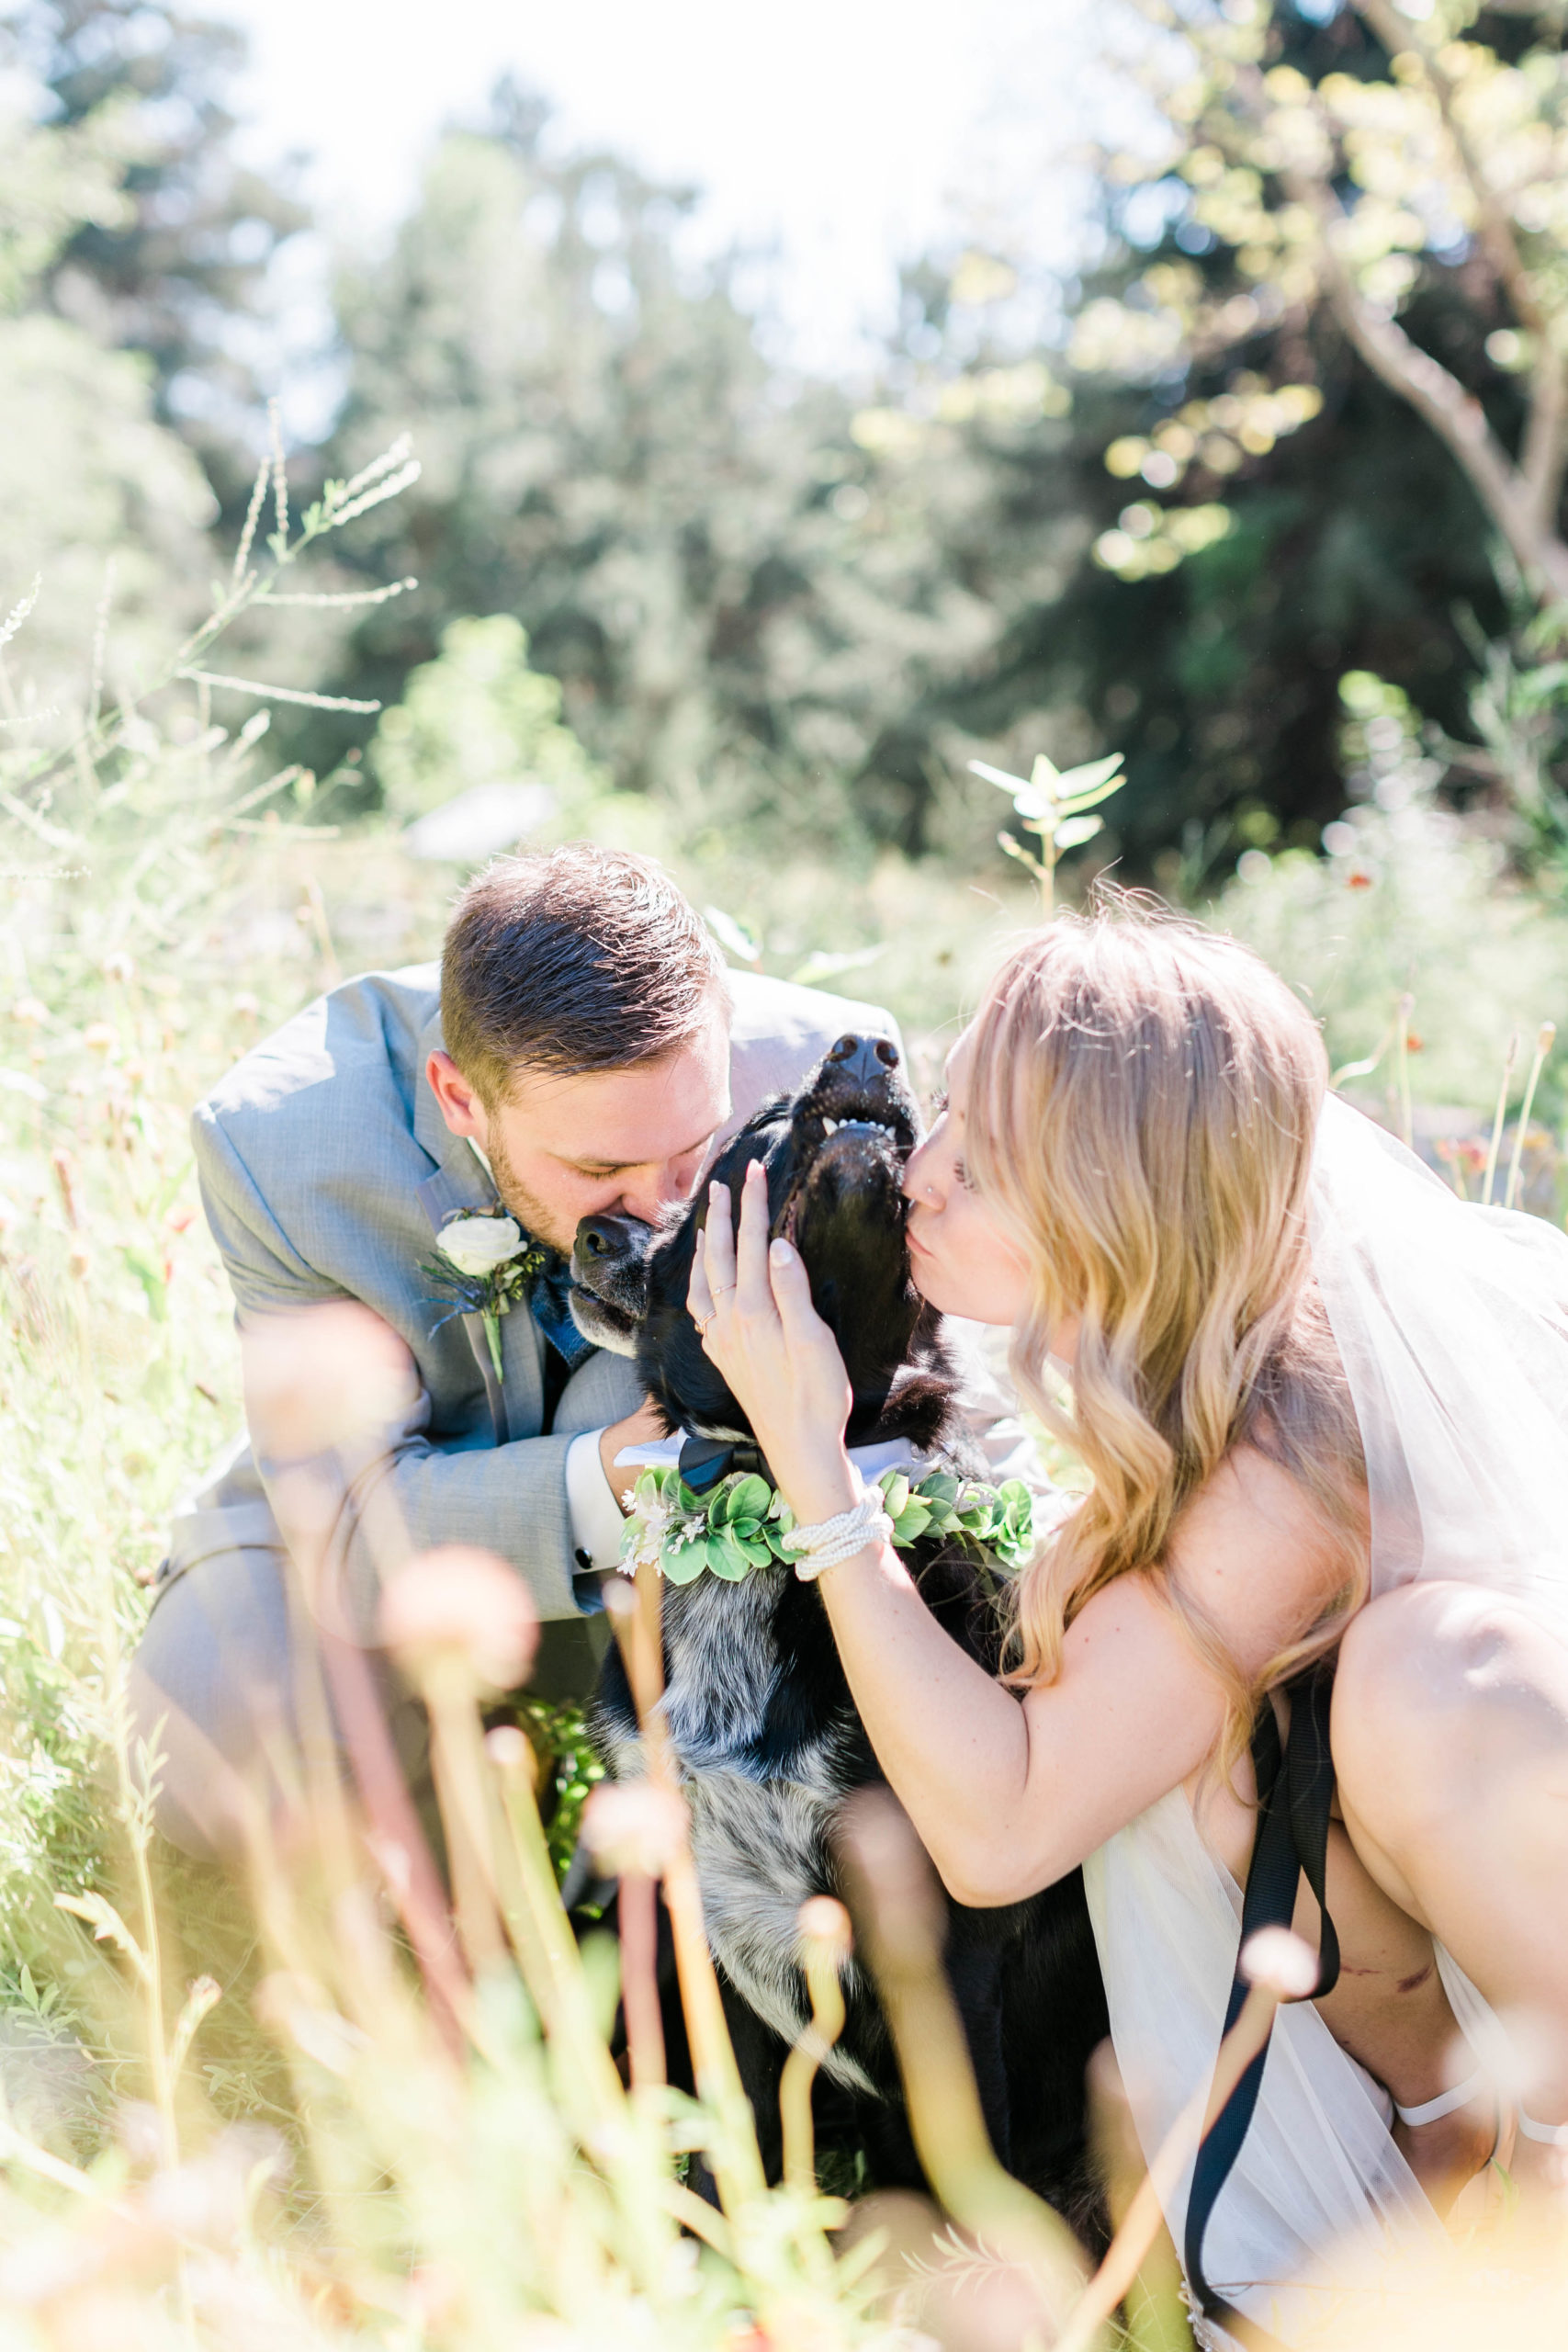 Boise Train Depot wedding with the bride and groom's dogs in a field